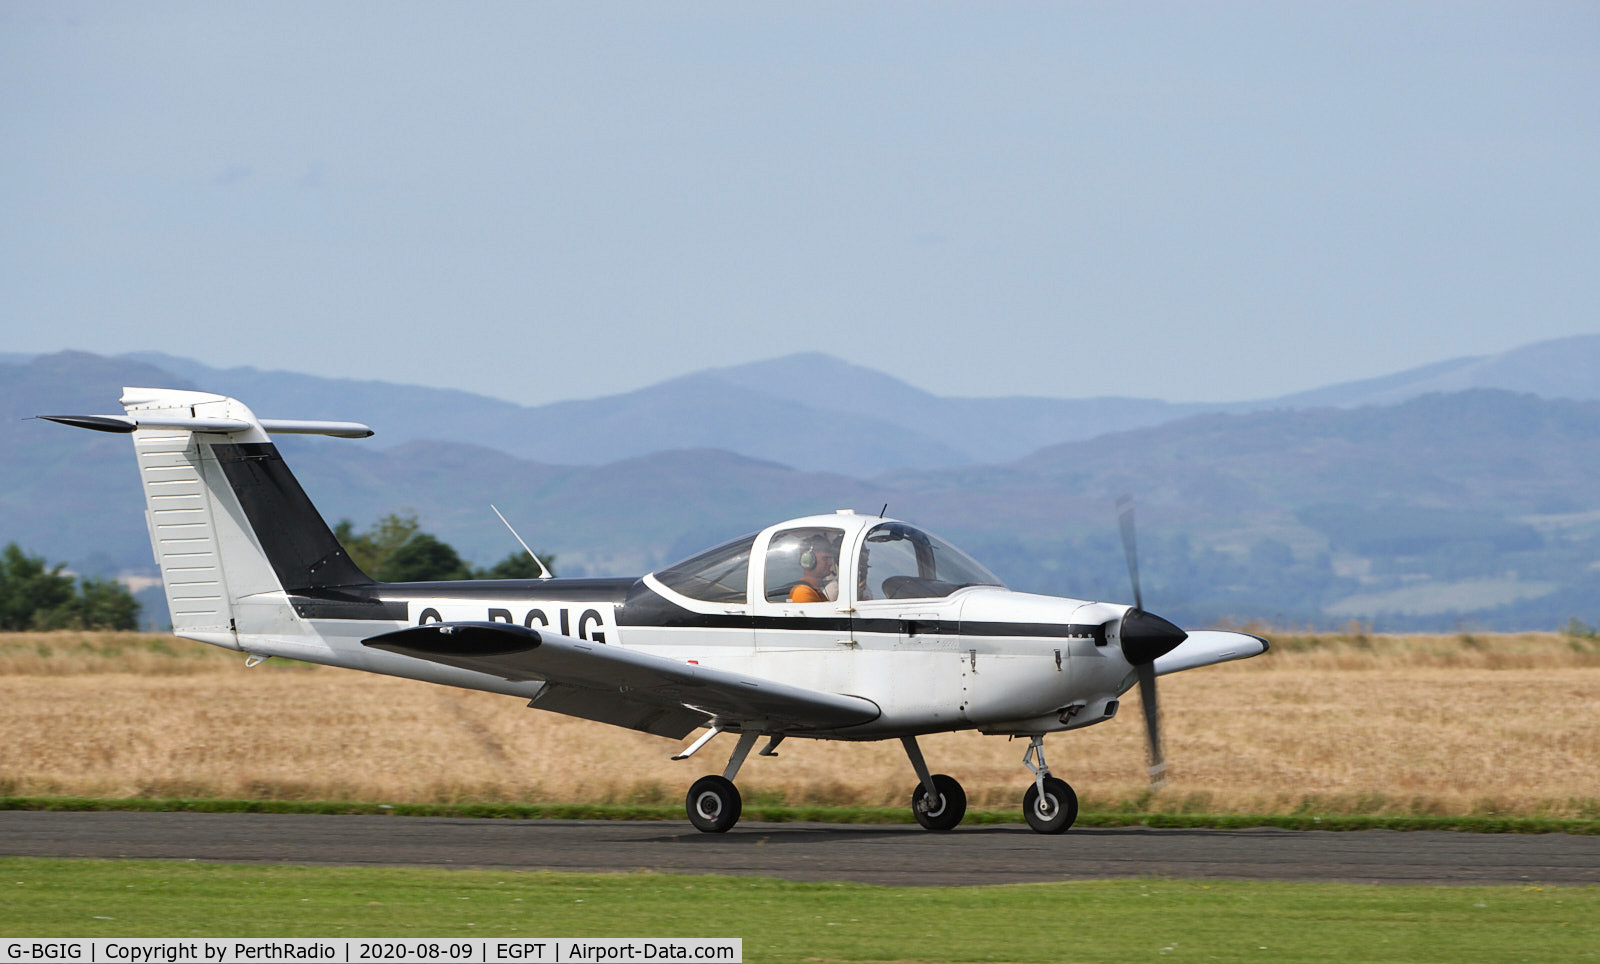 G-BGIG, 1978 Piper PA-38-112 Tomahawk Tomahawk C/N 38-78A0773, Thought to be the last airworthy Tomahawk in Scotland